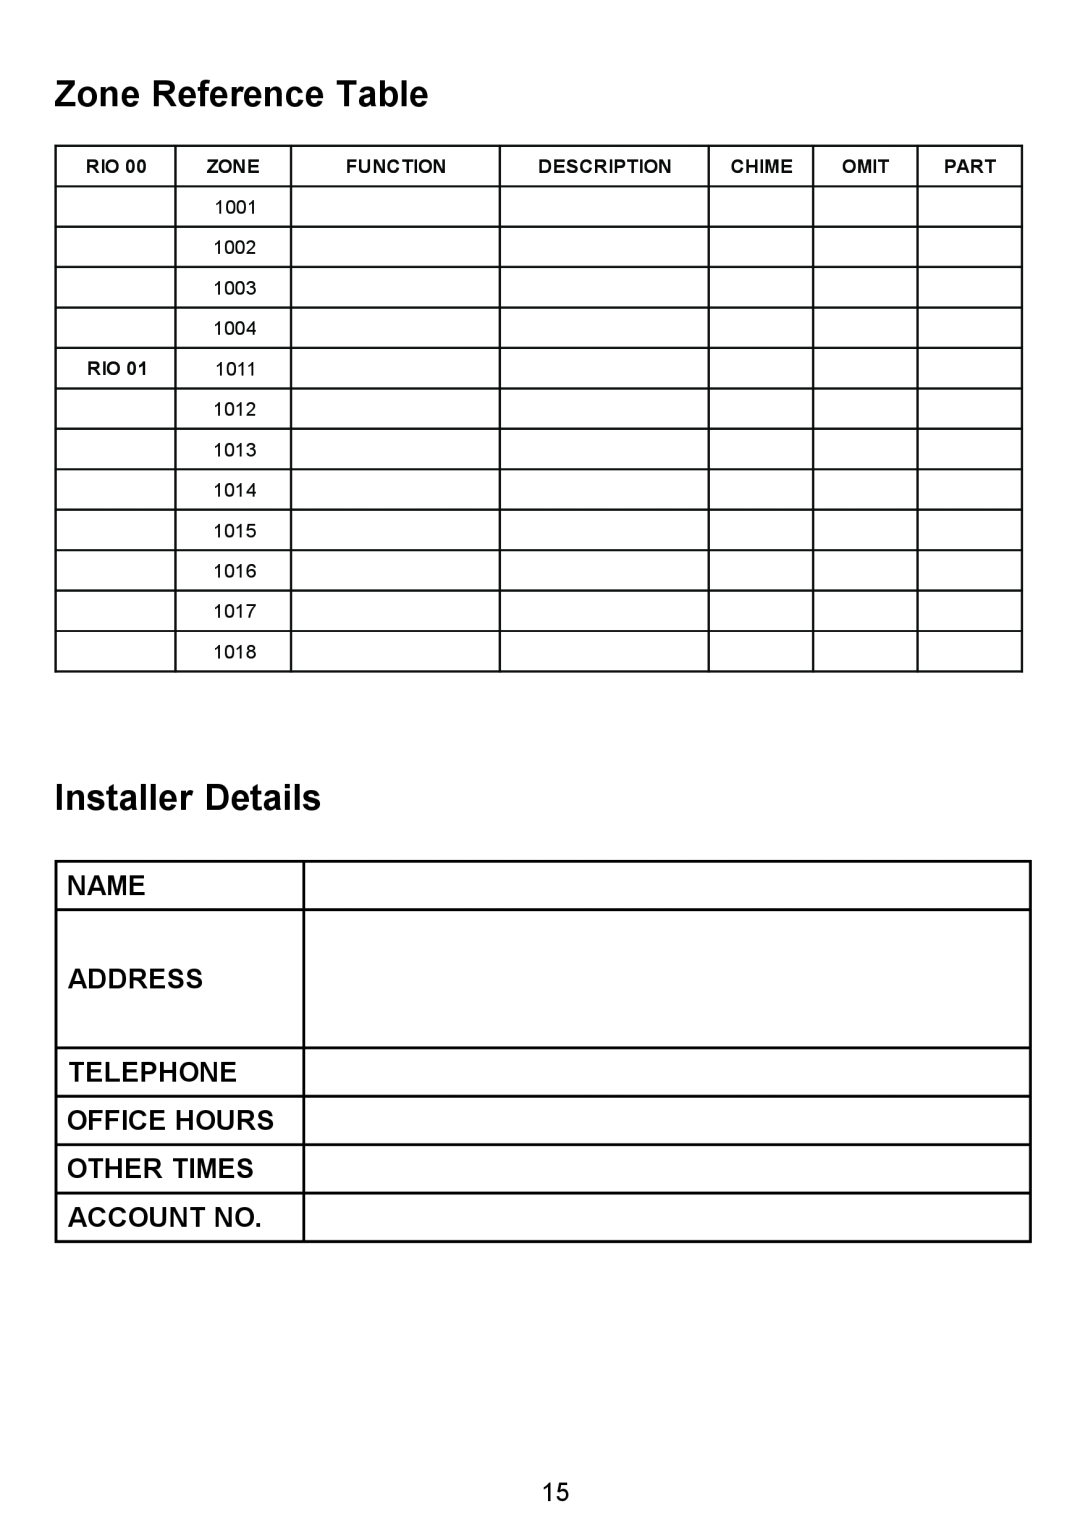 Honeywell Galaxy 2 Zone Reference Table, Installer Details, Name Address Telephone Office Hours Other Times, Account No 